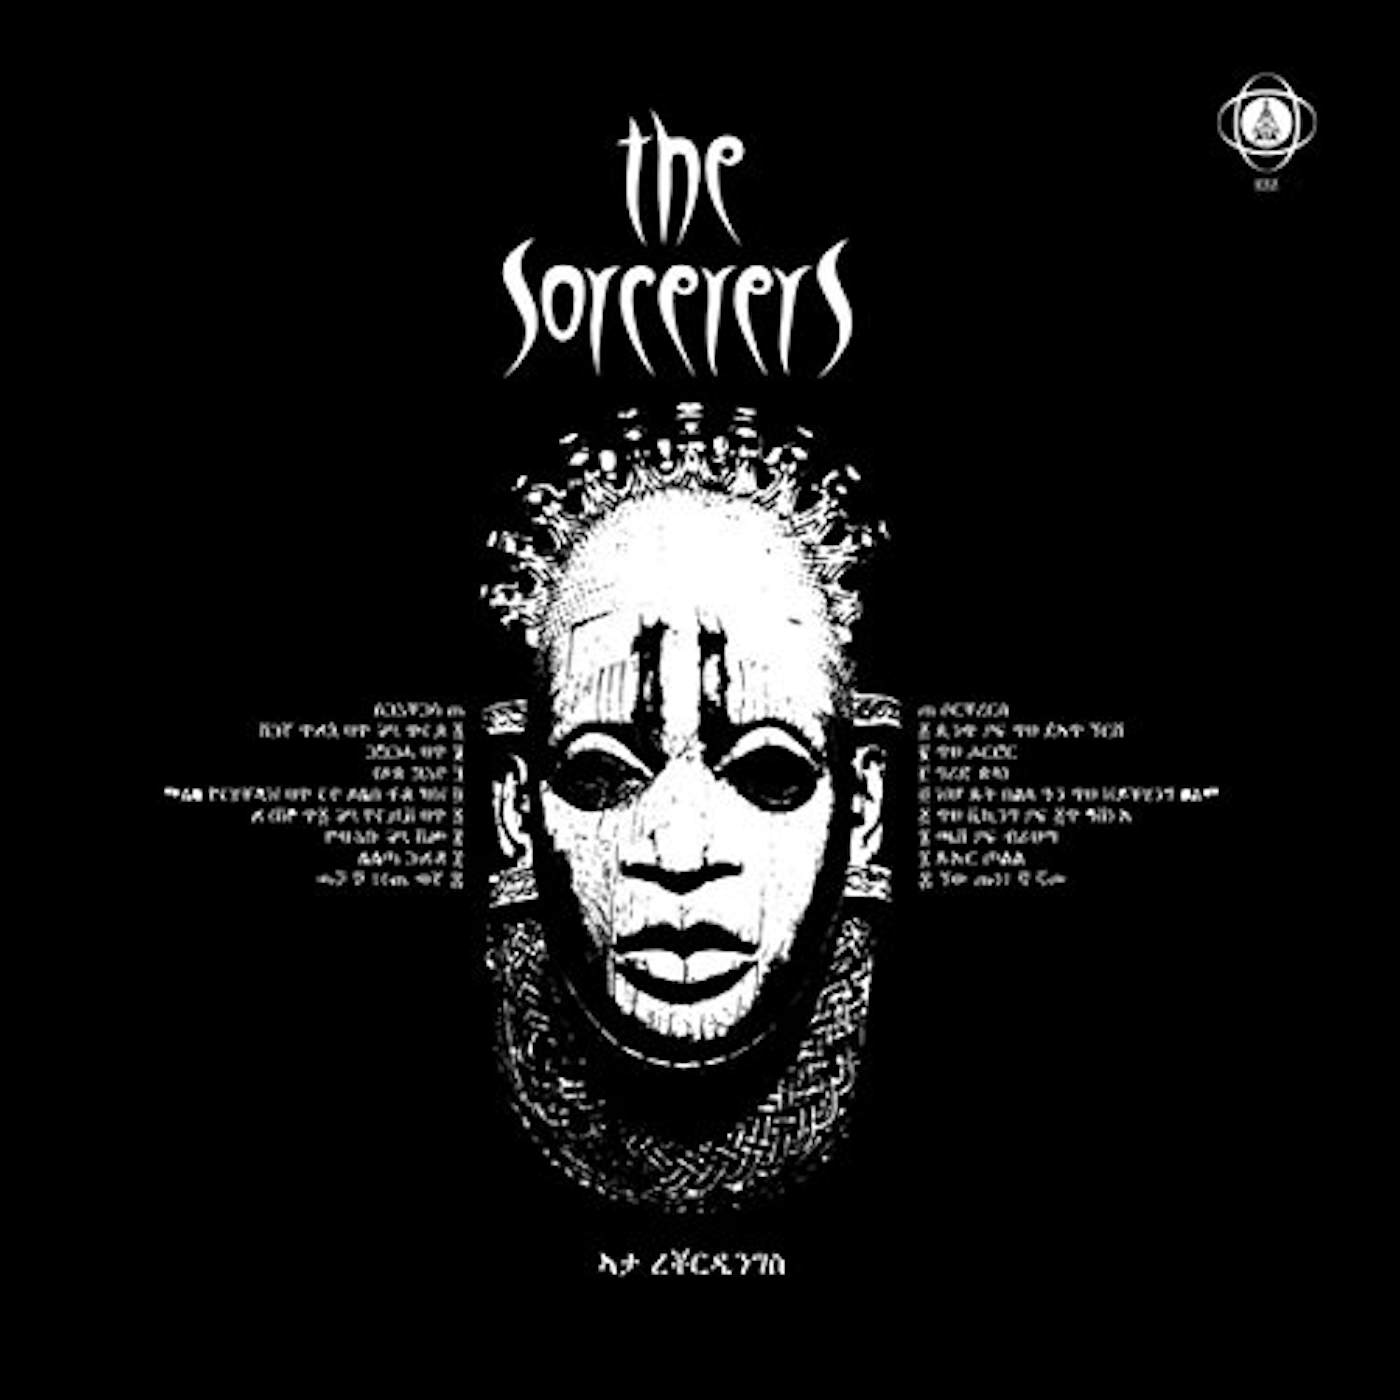 The Sorcerers CD